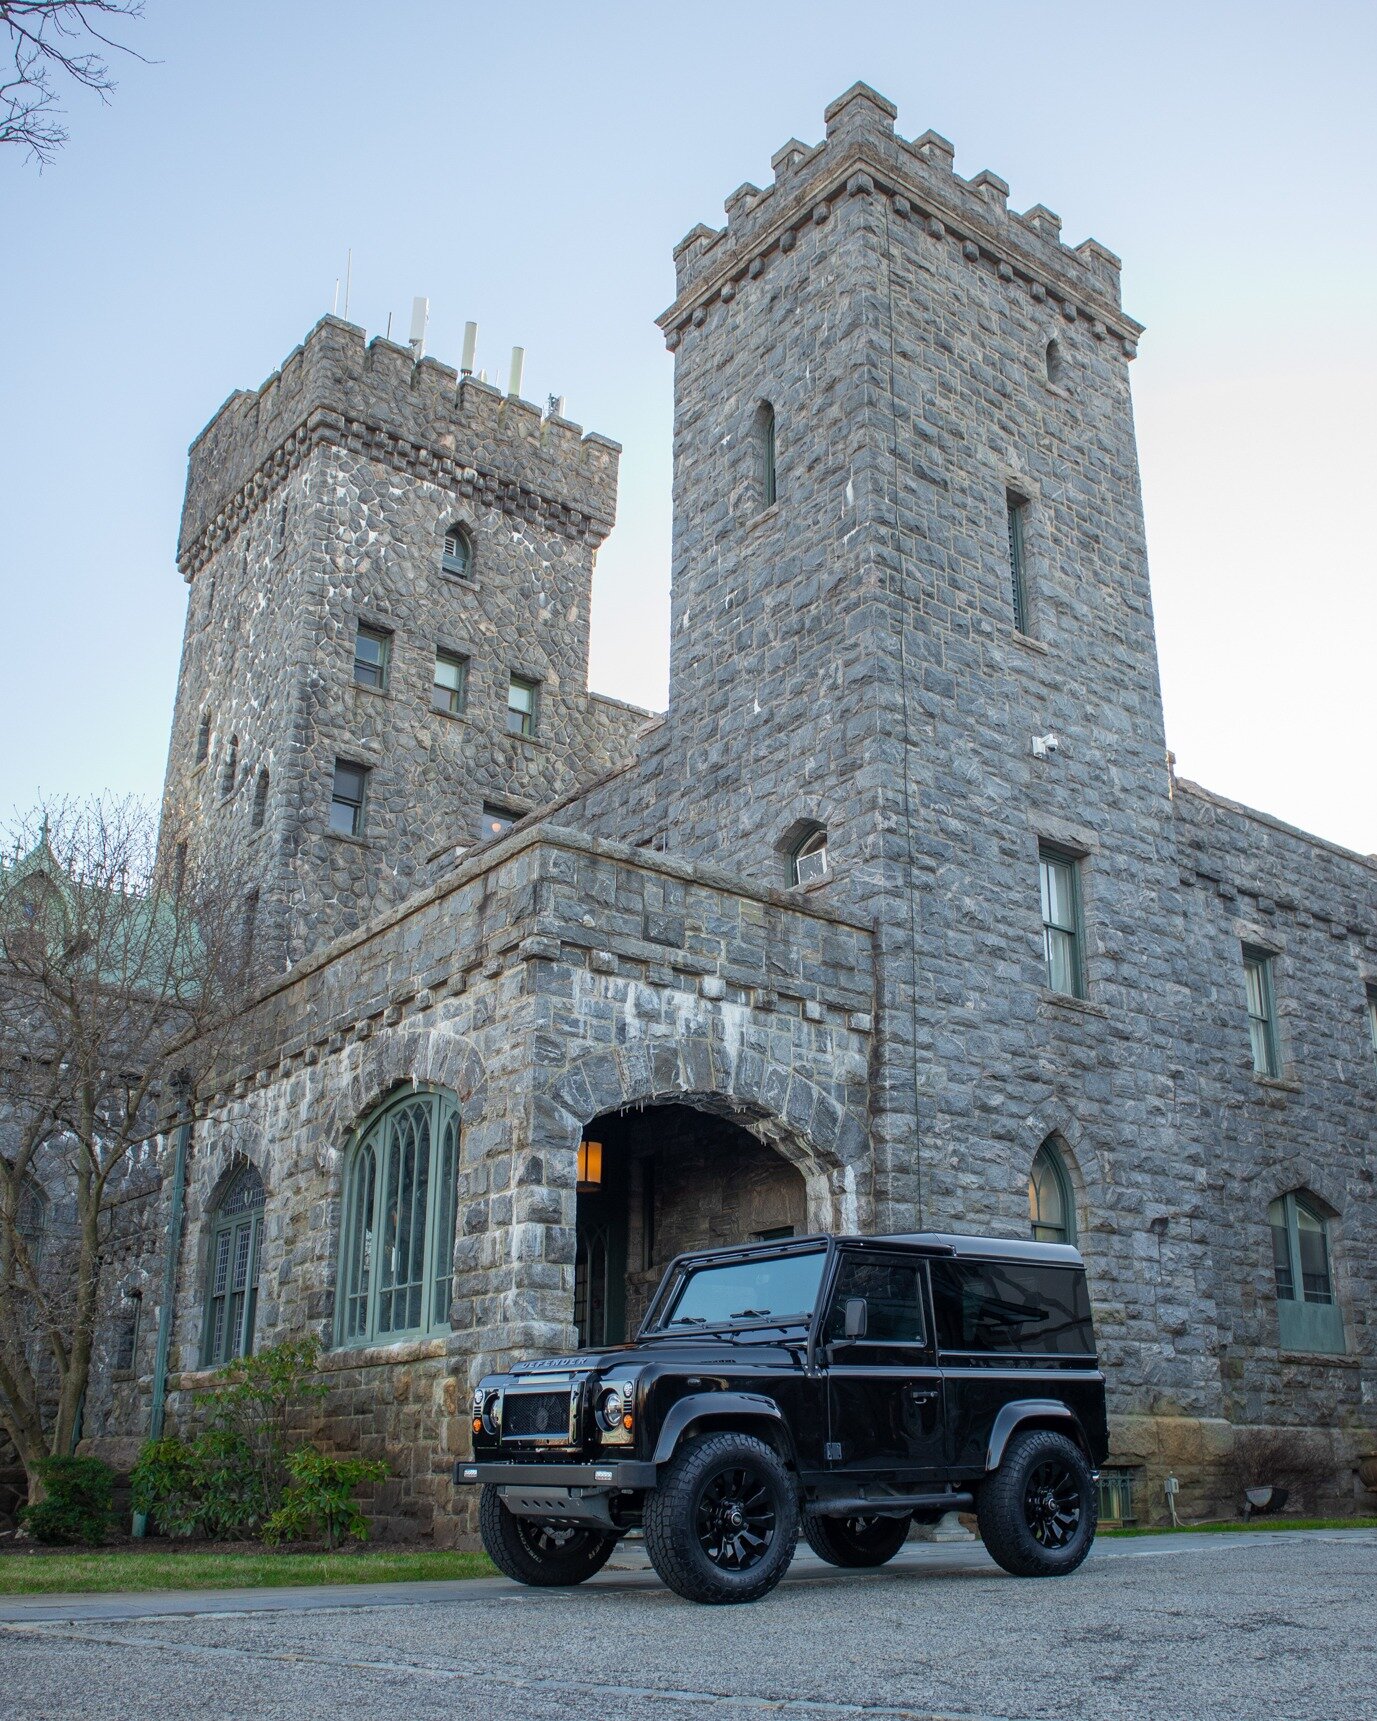 Our restored 1992 Land Rover Defender 90 stands tall in the shadow of a castle, a symbol of strength and heritage.

#landrover #defender90 #defender #landy #custom #restoration #handcrafted #classiccar #truck #bespoke #urban #classic #vintage #advent